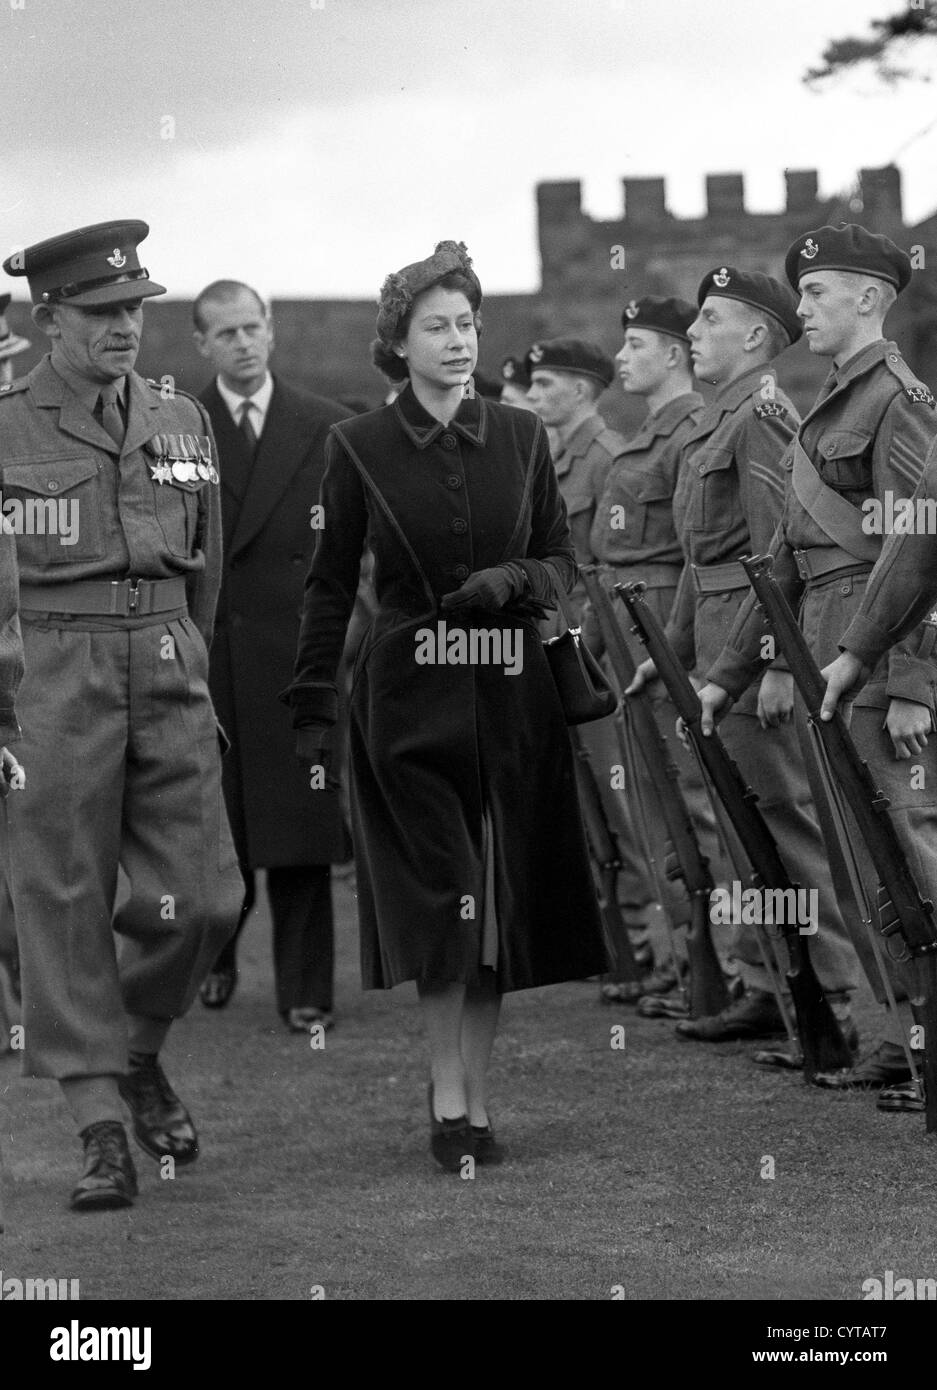 Queen Elizabeth inspecting Army Cadets at Shrewsbury Castle 1952. Britain 1950s Stock Photo